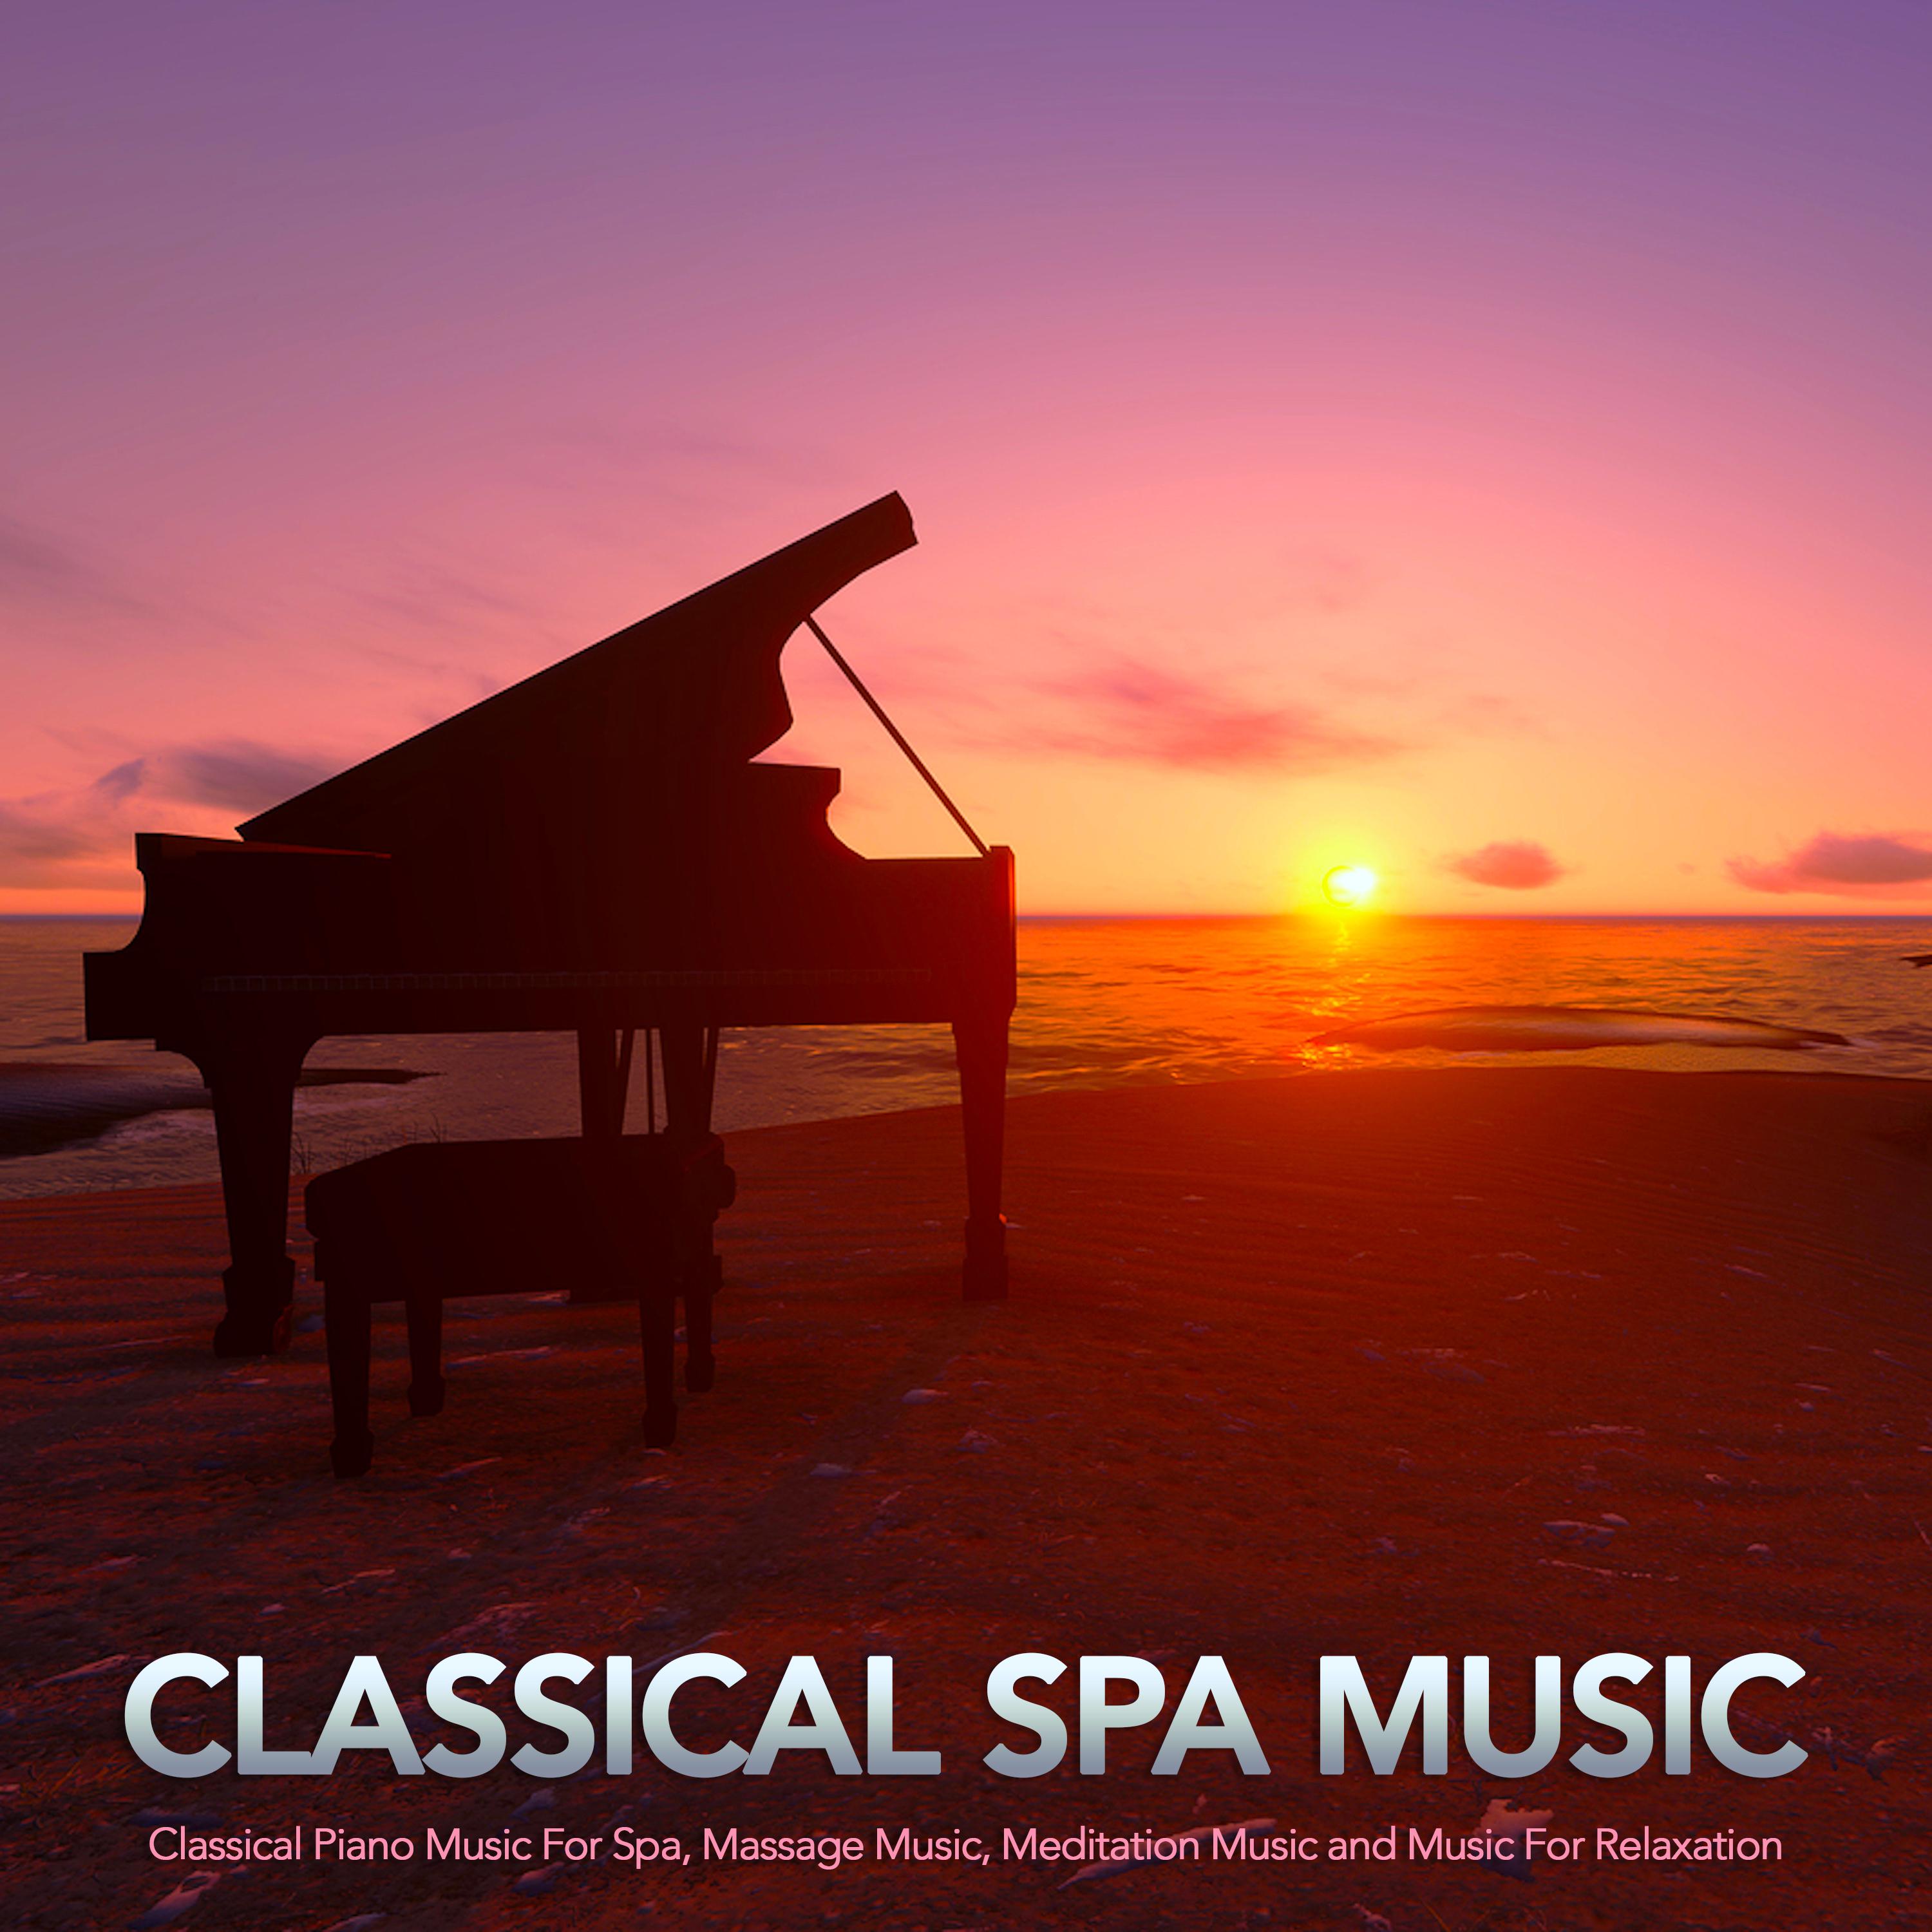 Pathetique - Beethoven - Classical Piano Music - Spa Music